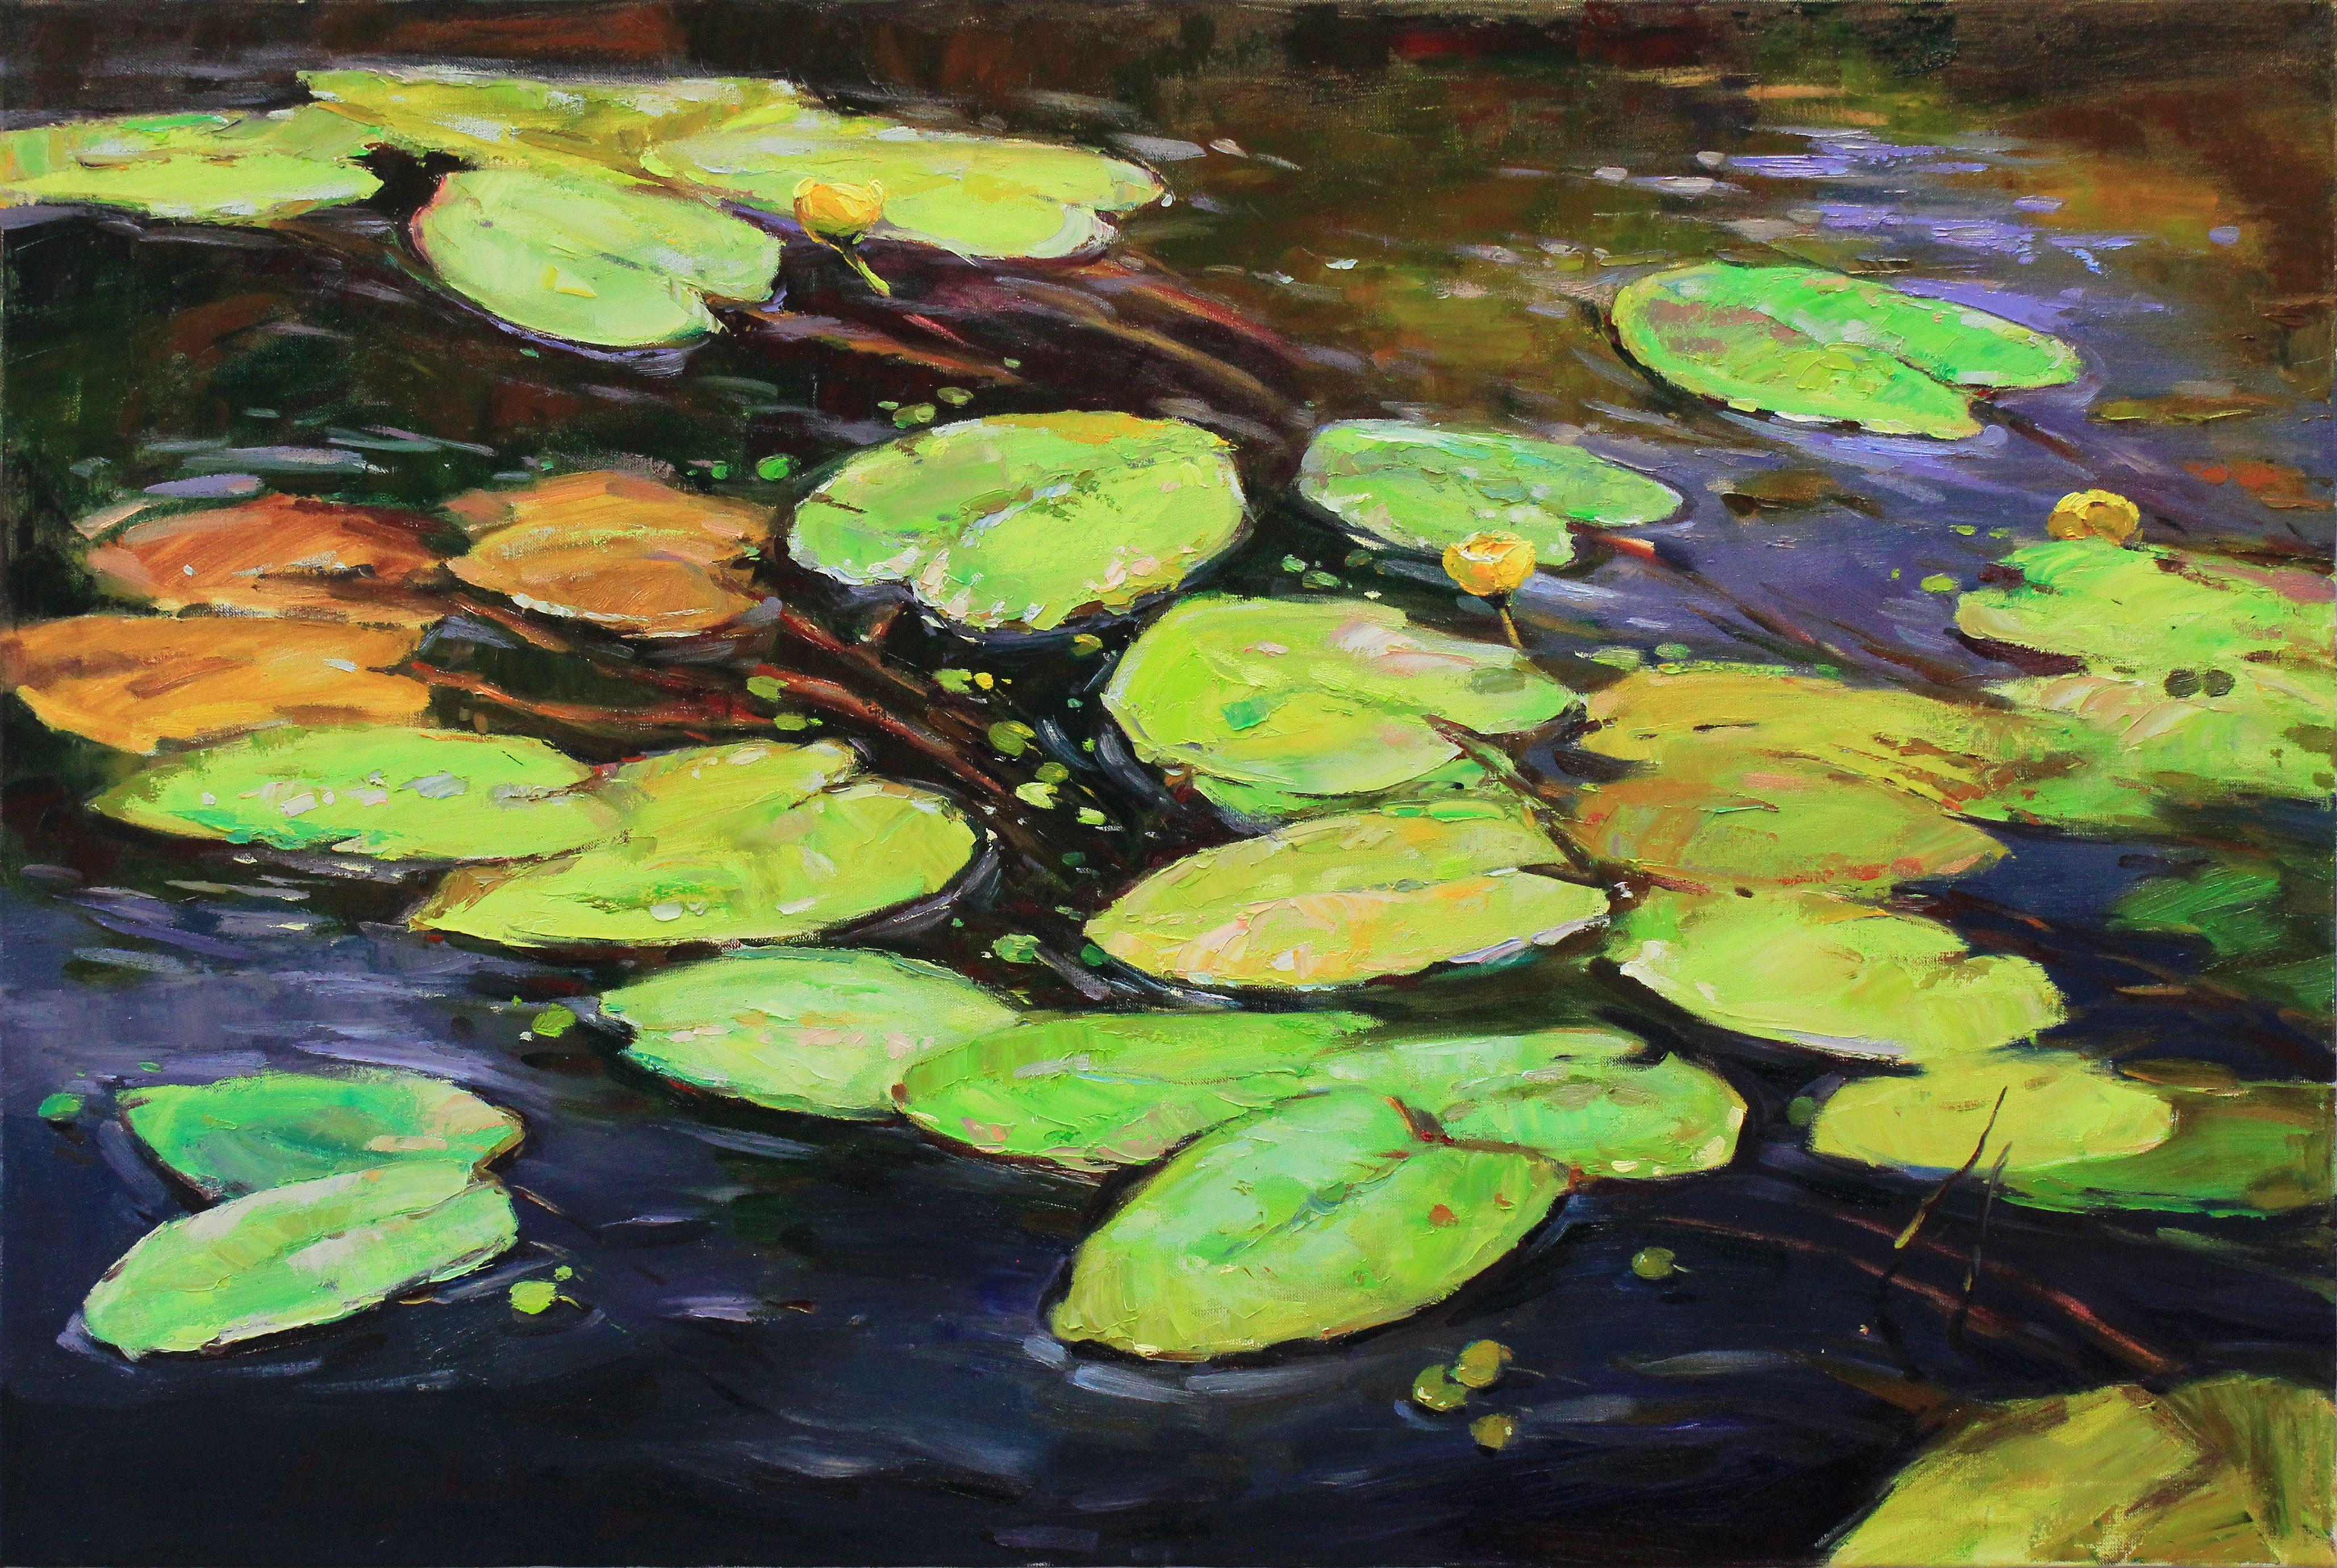 One of a kind original Oil painting by Ukrainian artist Alisa Onipchenko-Cherniakovska - Canvas painting - Painting signed front and back - Certificate of Authenticity for painting included TITLE: "Water lilies"   THE SIZE: 80.0 X 120.0 CM / 31.5 X